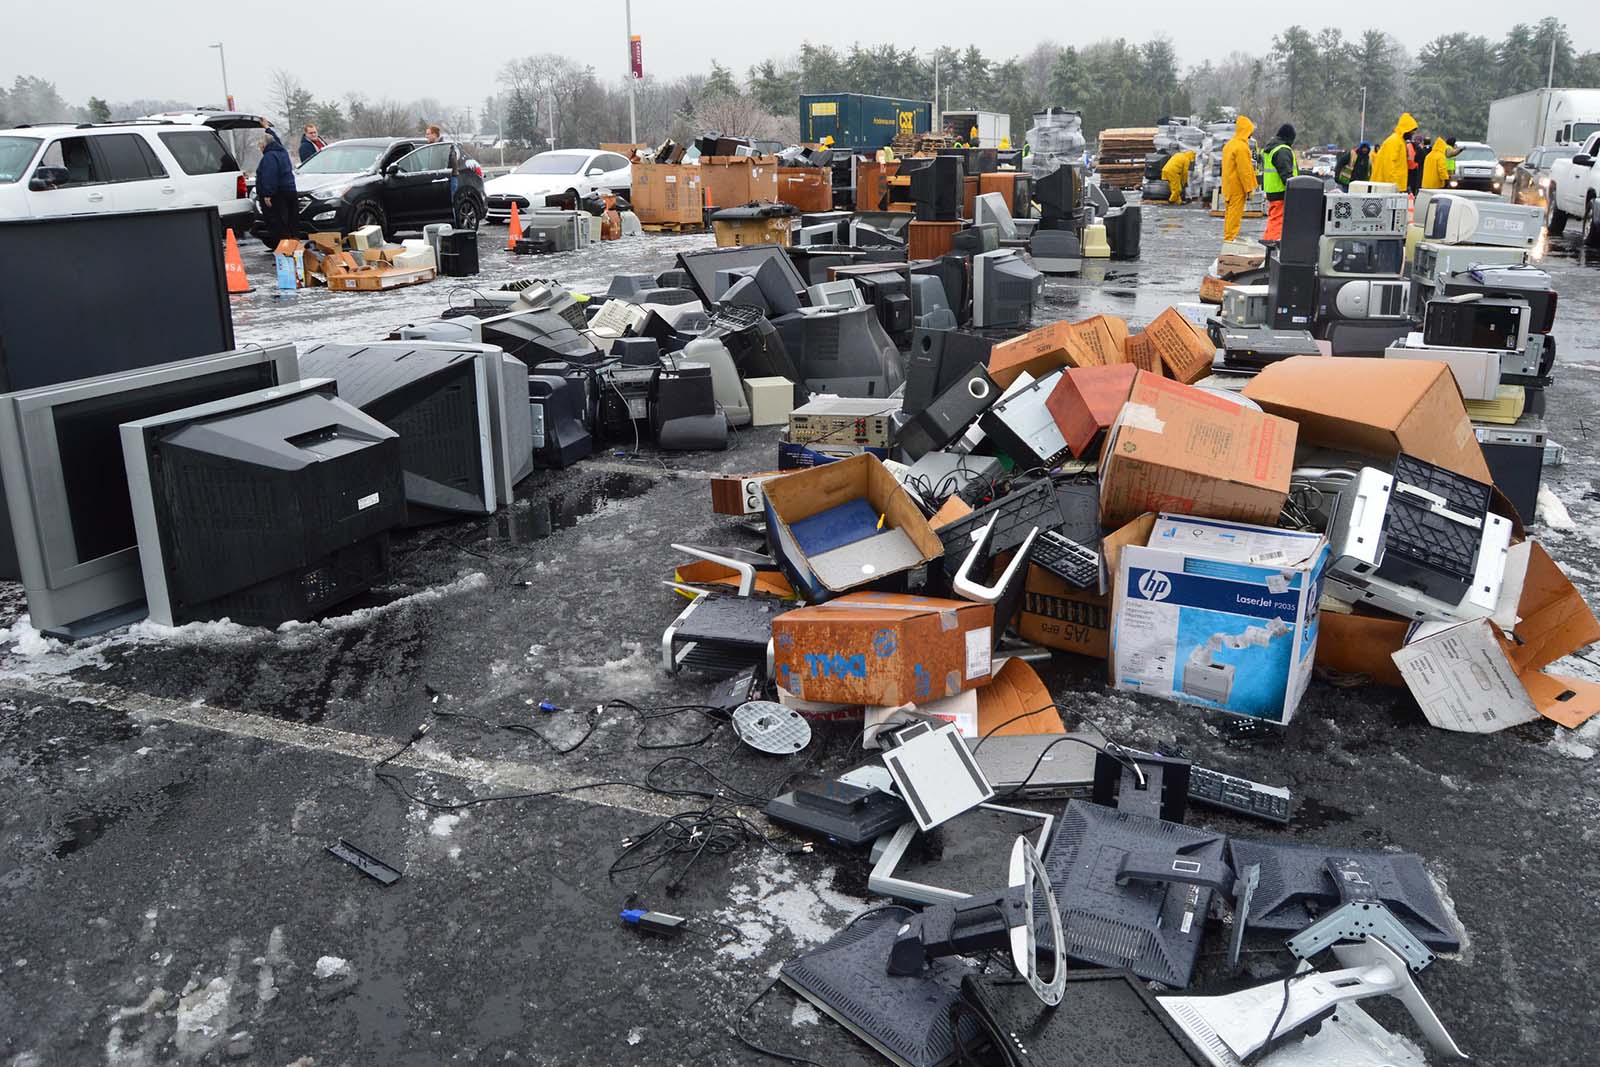 Piles of electronic garbage in a dump.